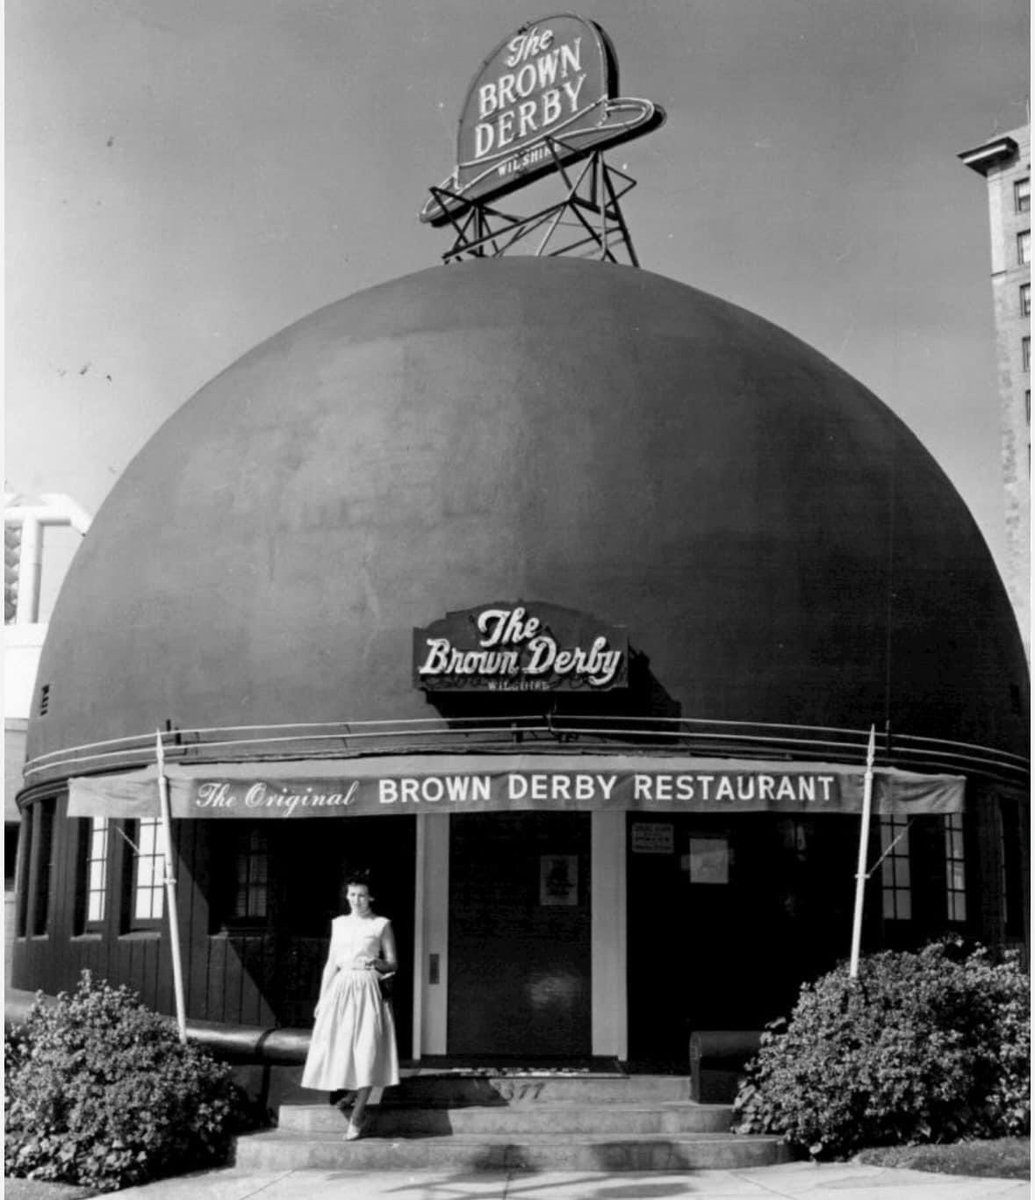 1956, Entrance to The Brown Derby restaurant on Wilshire Blvd, Los Angeles, Ca.